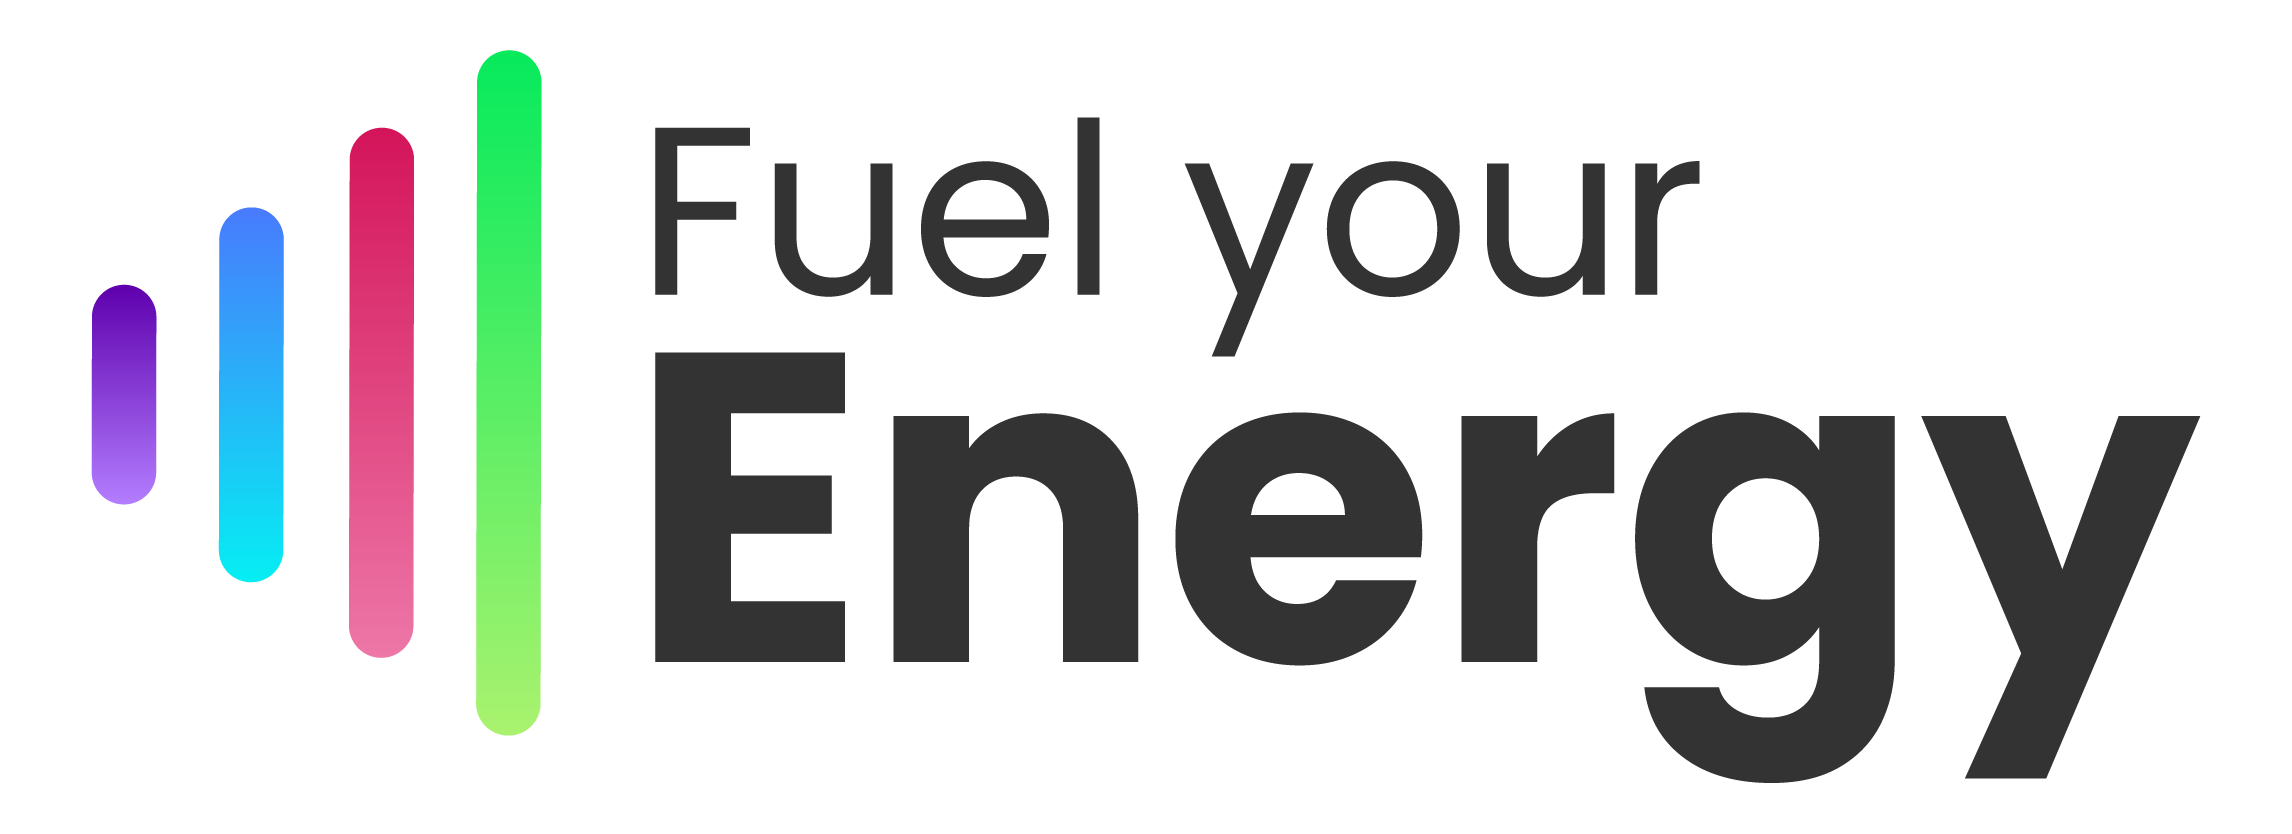 Fuel Your Energy